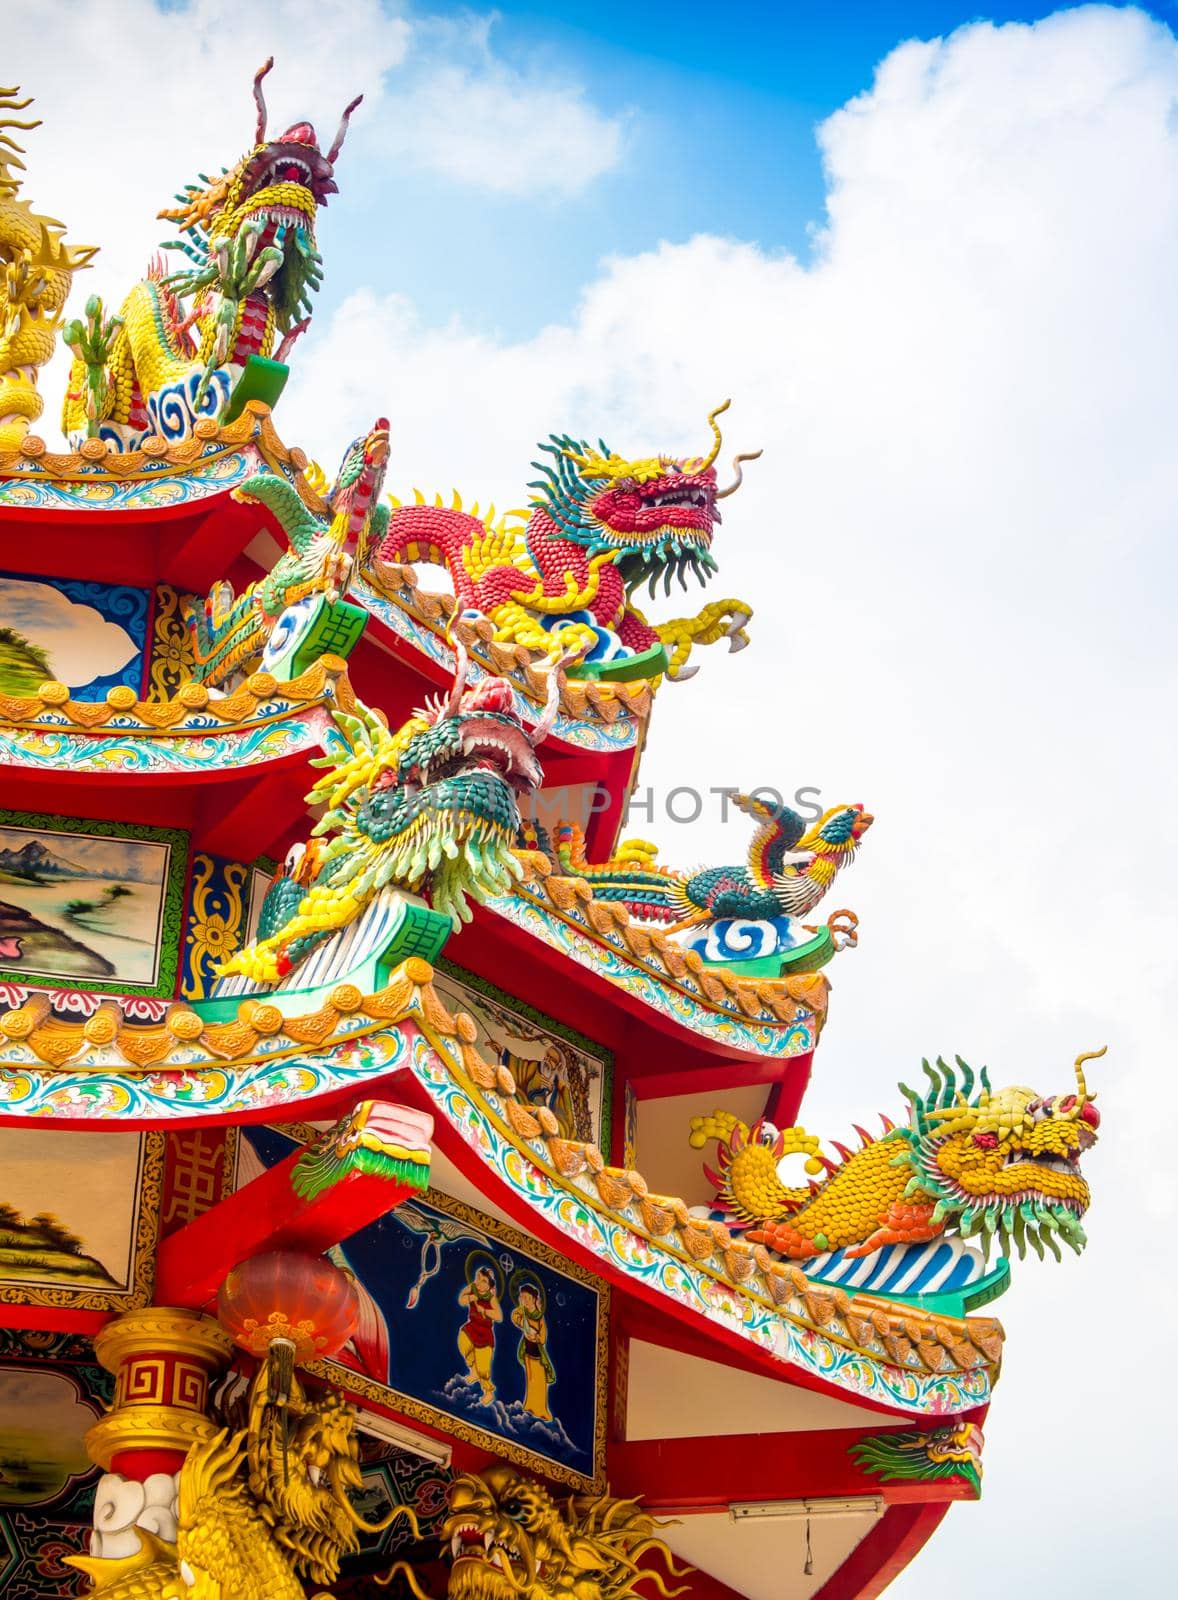 Colorful chinese dragon and swan statues adorned the rooftops of pavilions in Chinese religious venues